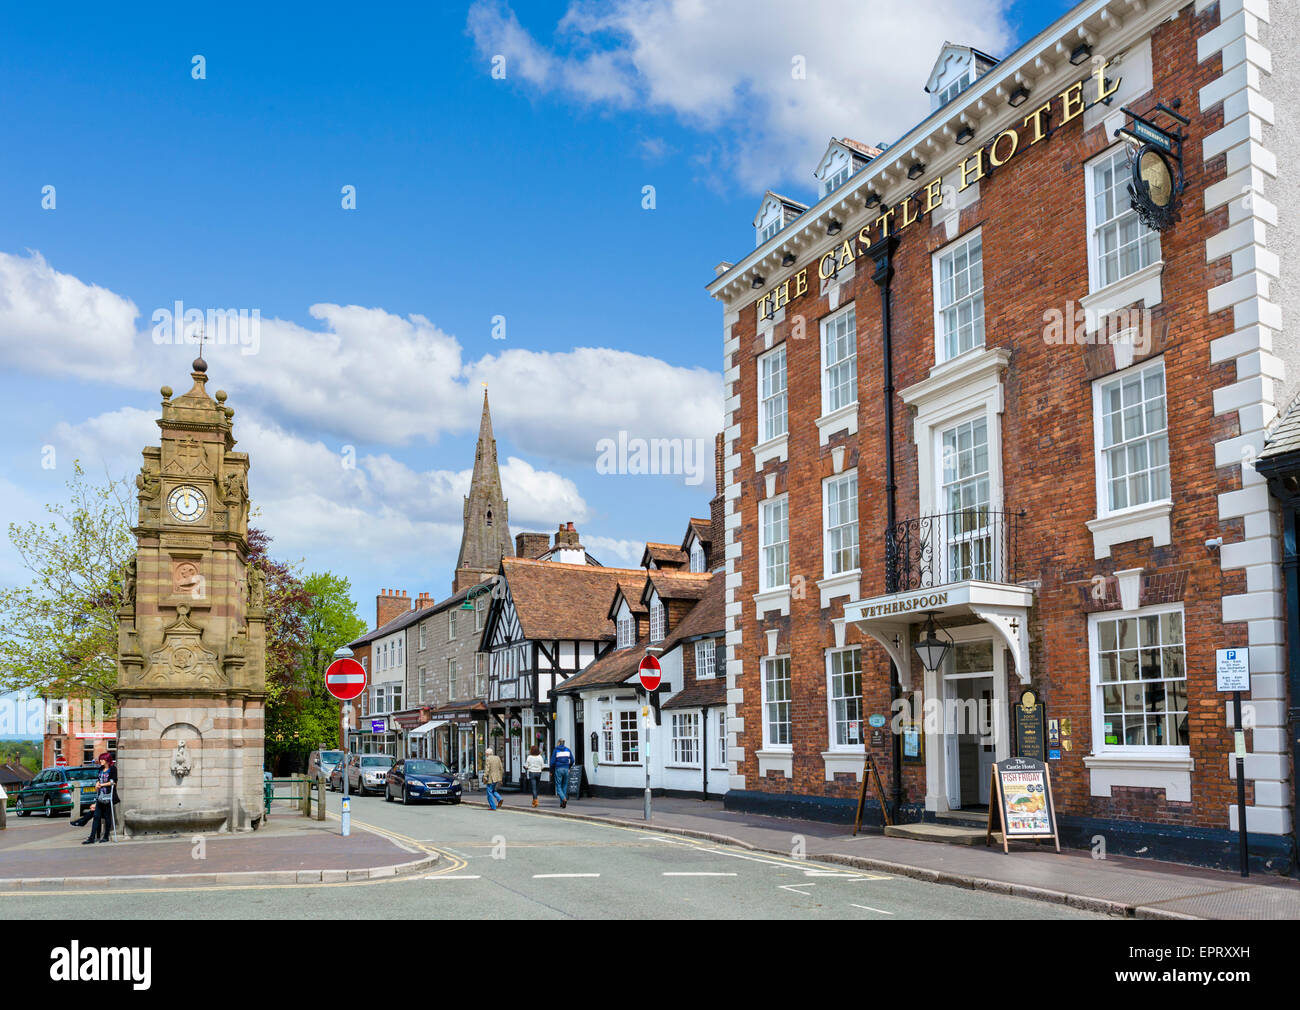 St Peter's Square in the historic town centre, Ruthin, Denbighshire, Wales, UK Stock Photo